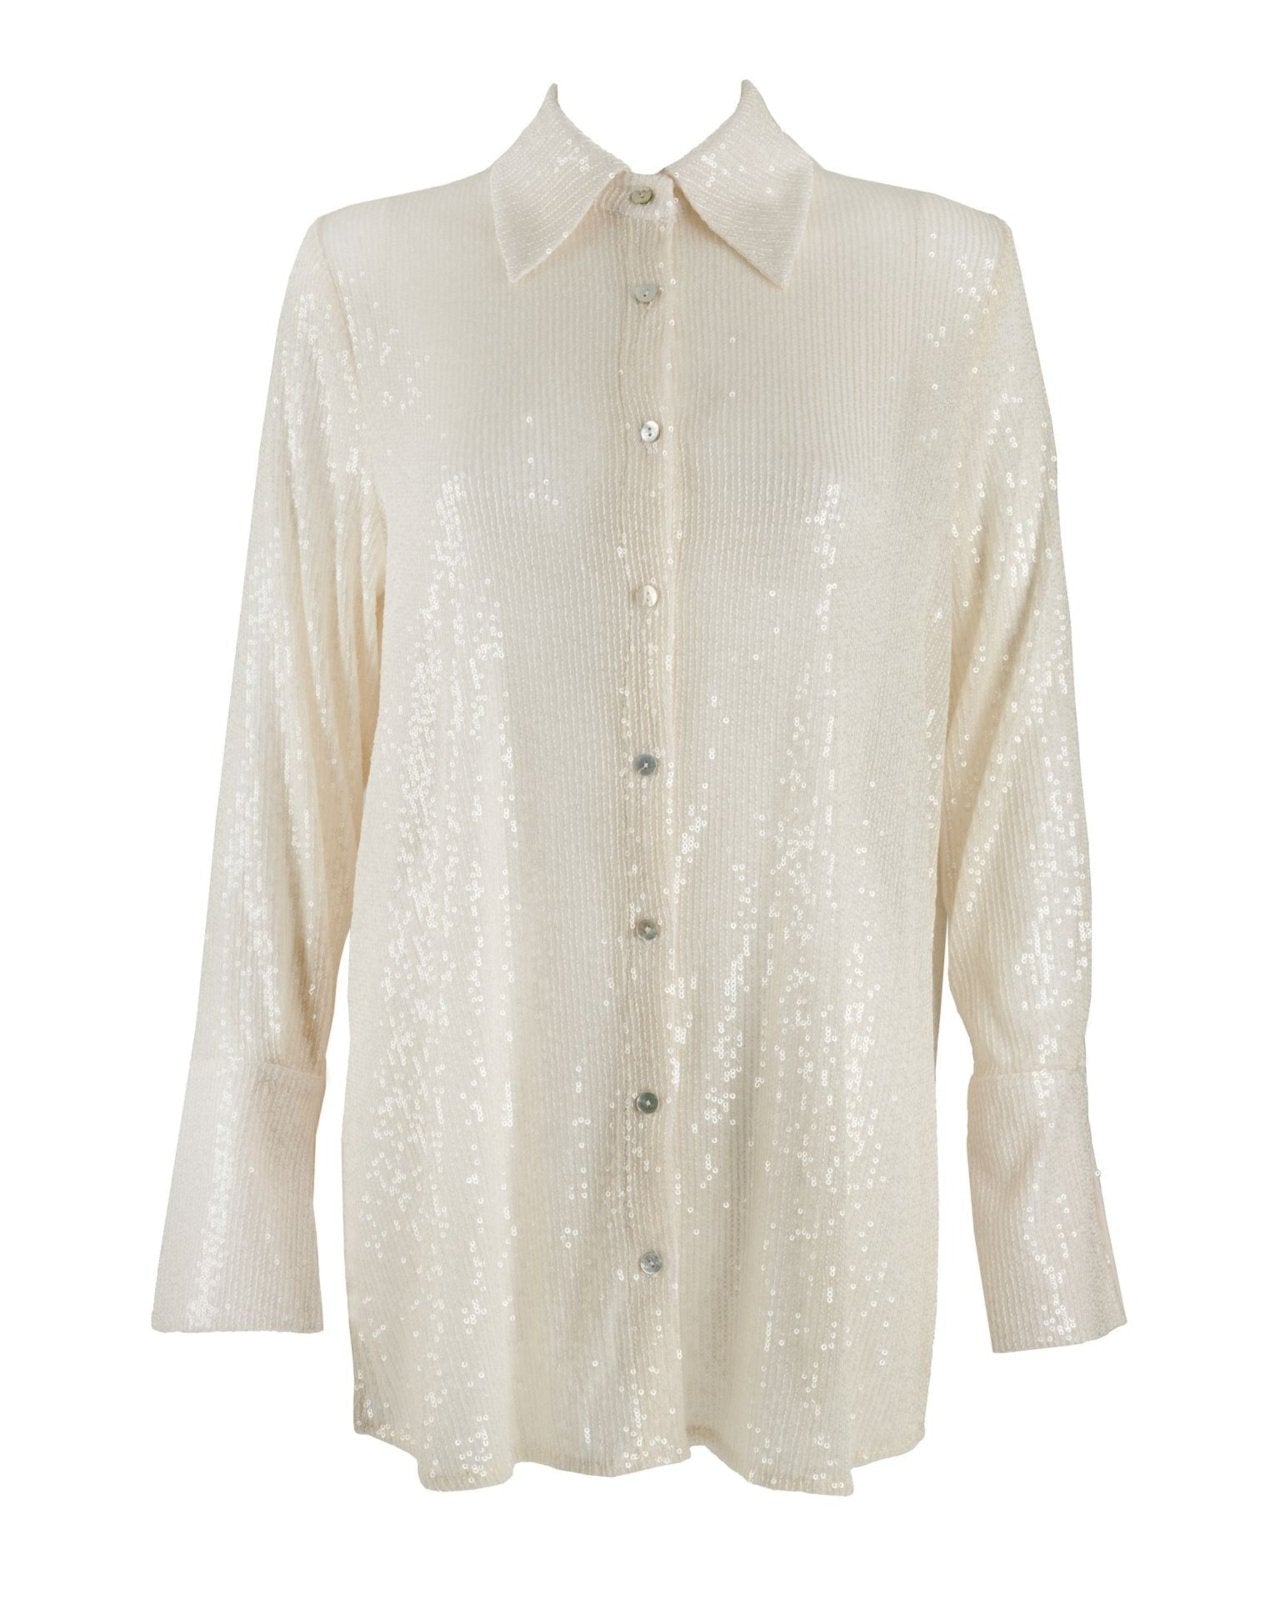 The Aisling  Champagne Sequin Shirt – Sinead Keary